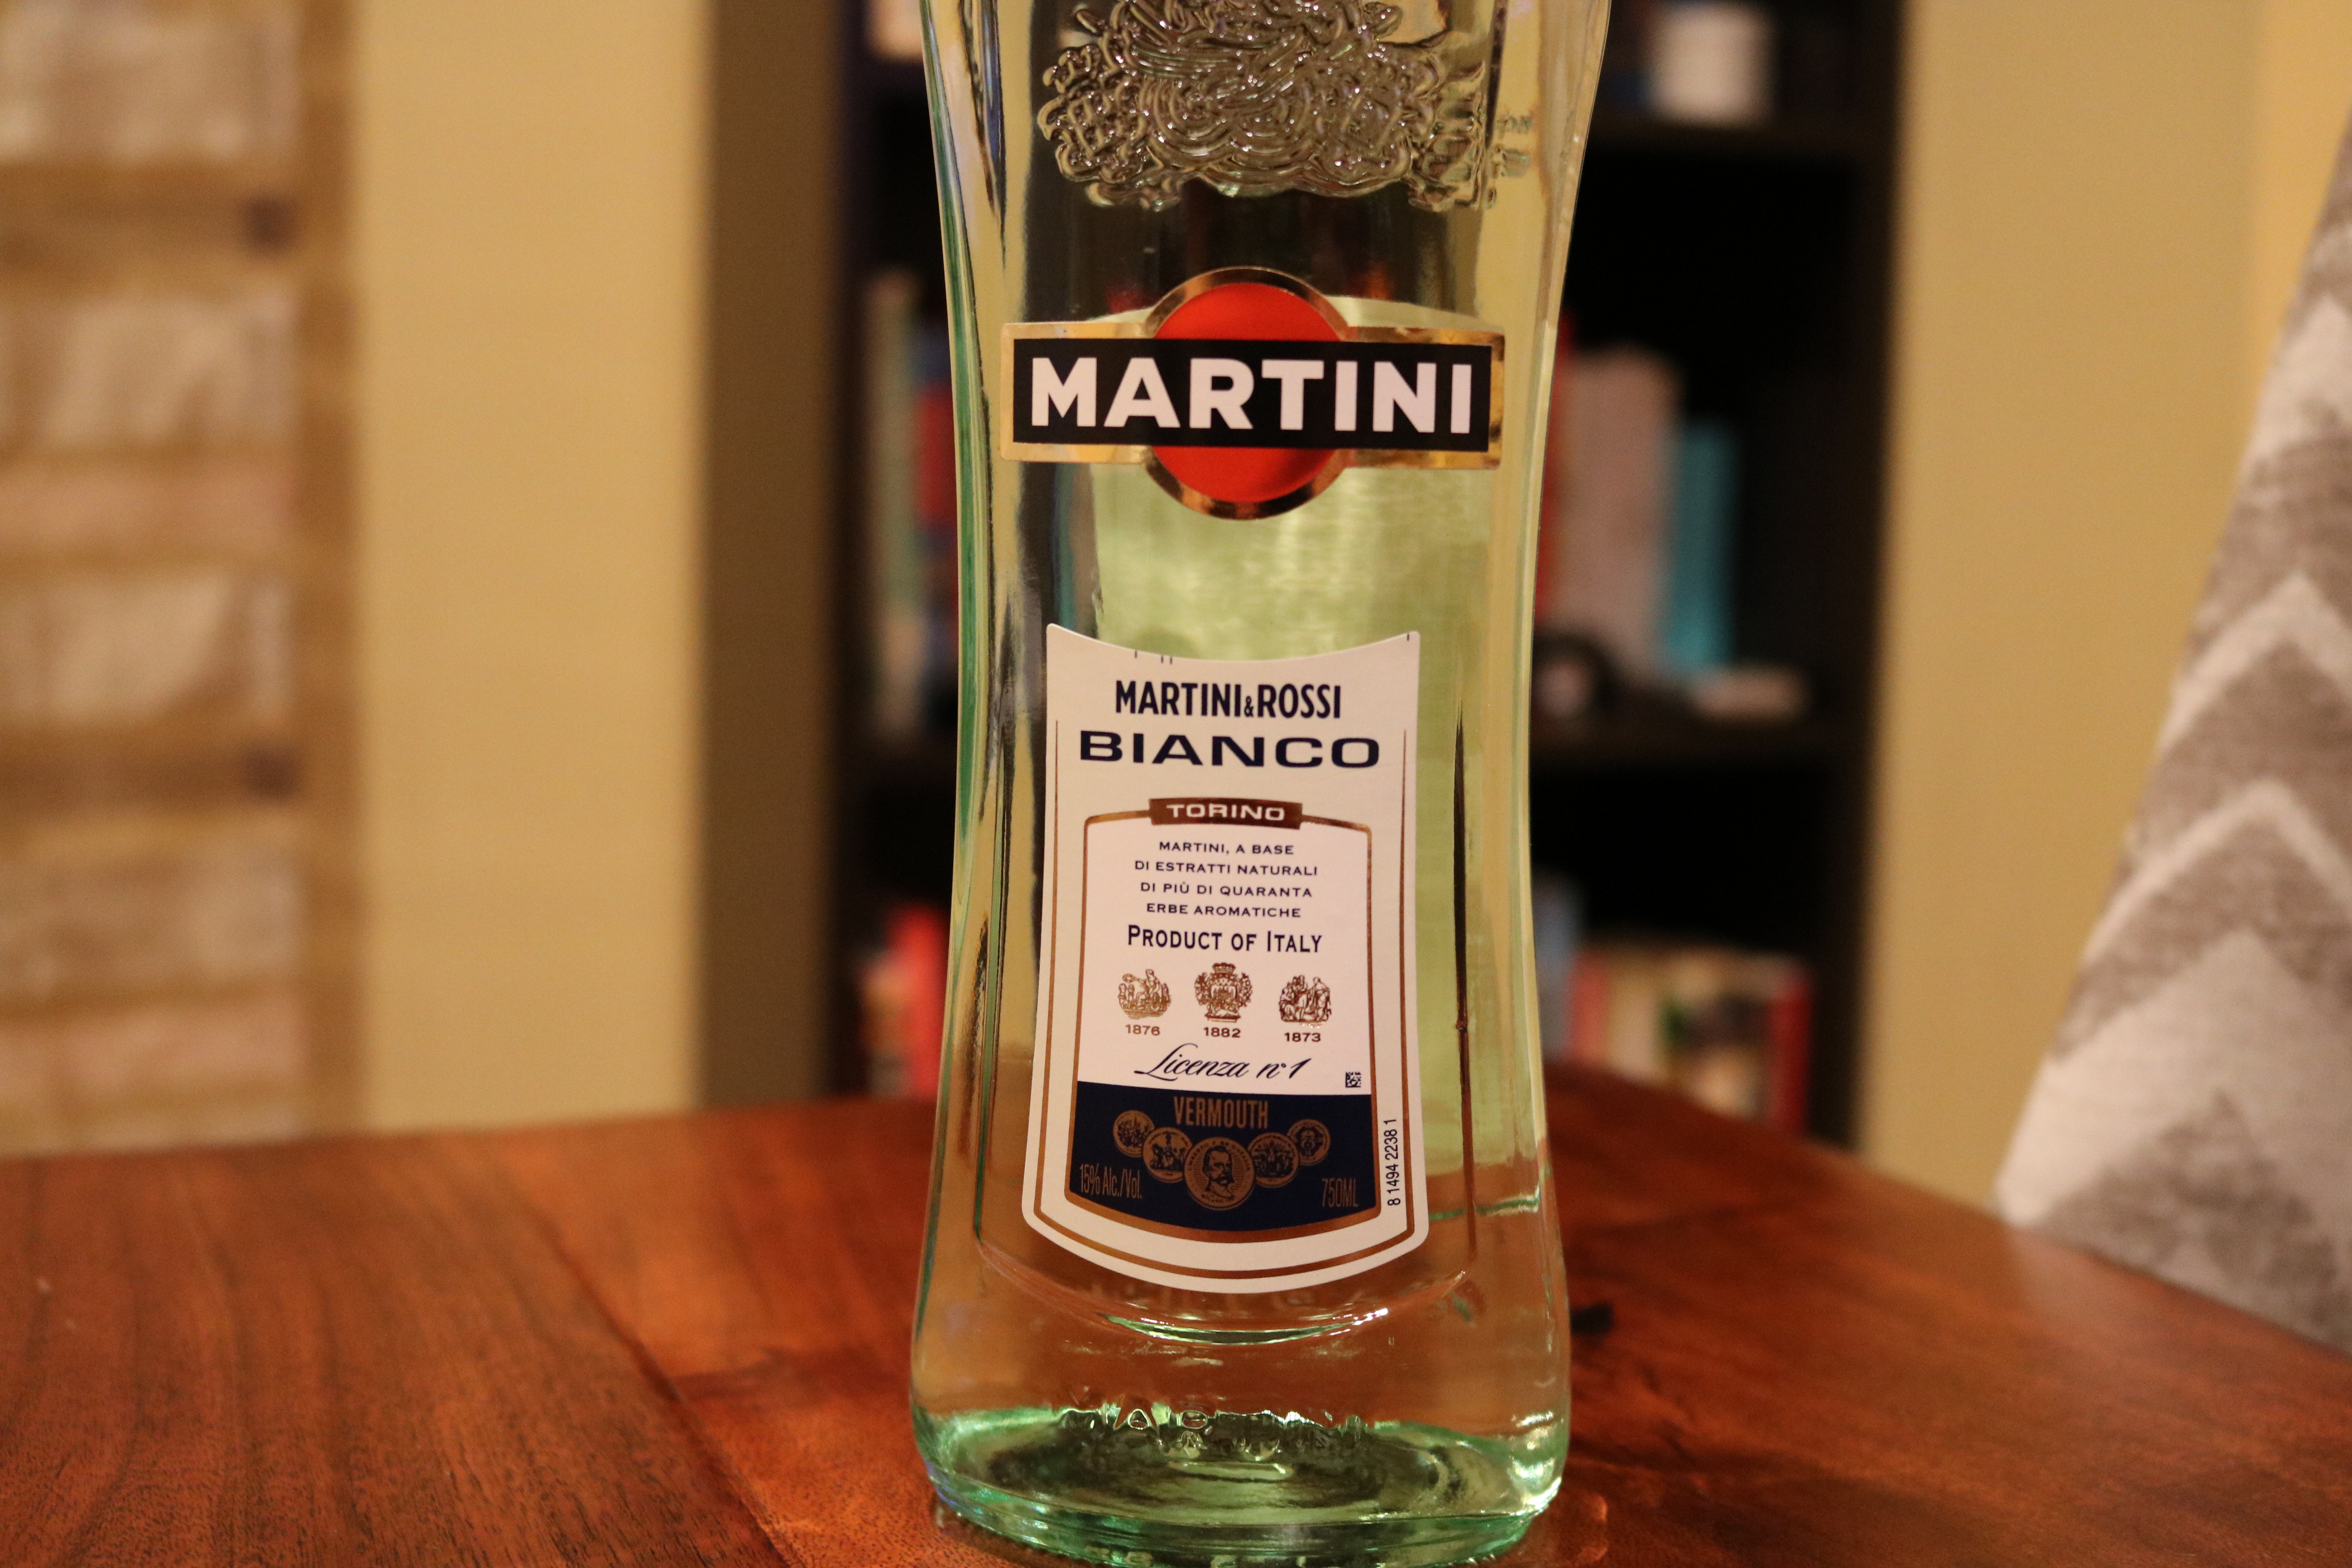 Martini Bianco Vermouth Bottle - FIrst Pour Wine